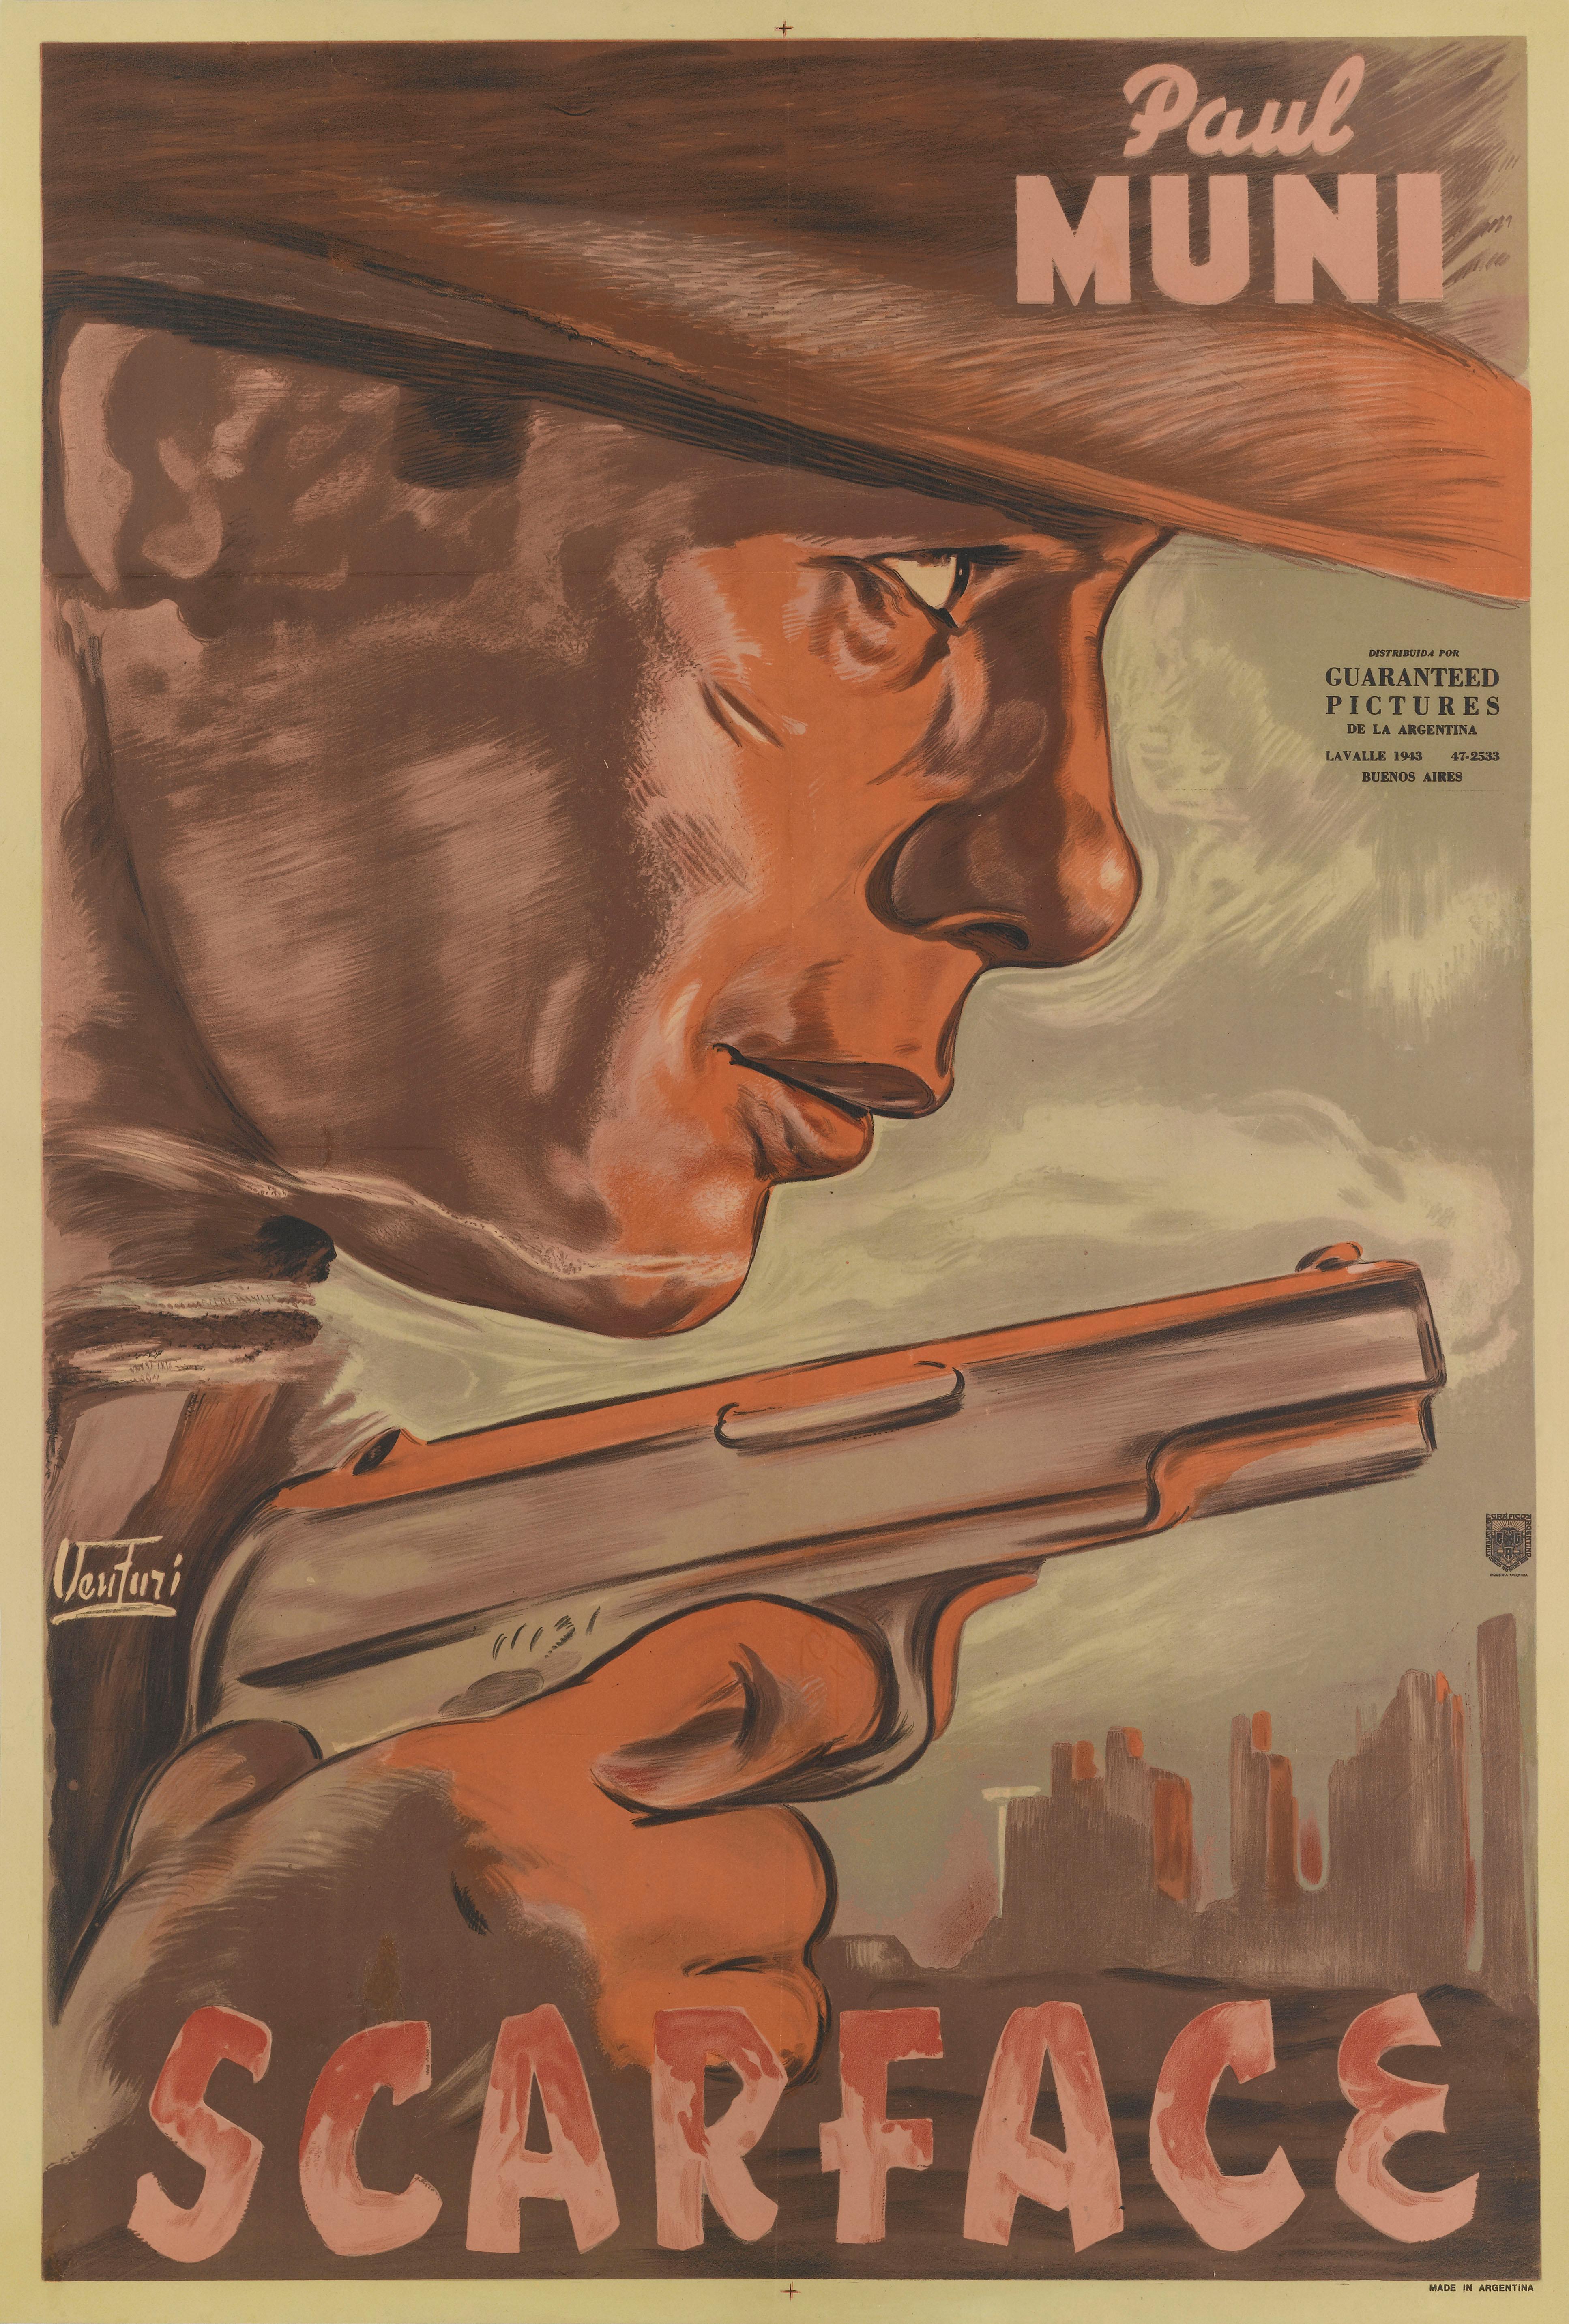 This Original Argentine film poster is for the 1932 version of Scarface, the film was not released iargentina until the 194o's , this poster is for the films first release.
Howard Hawks’s 1932 gangster extravaganza Scarface was part of the initial